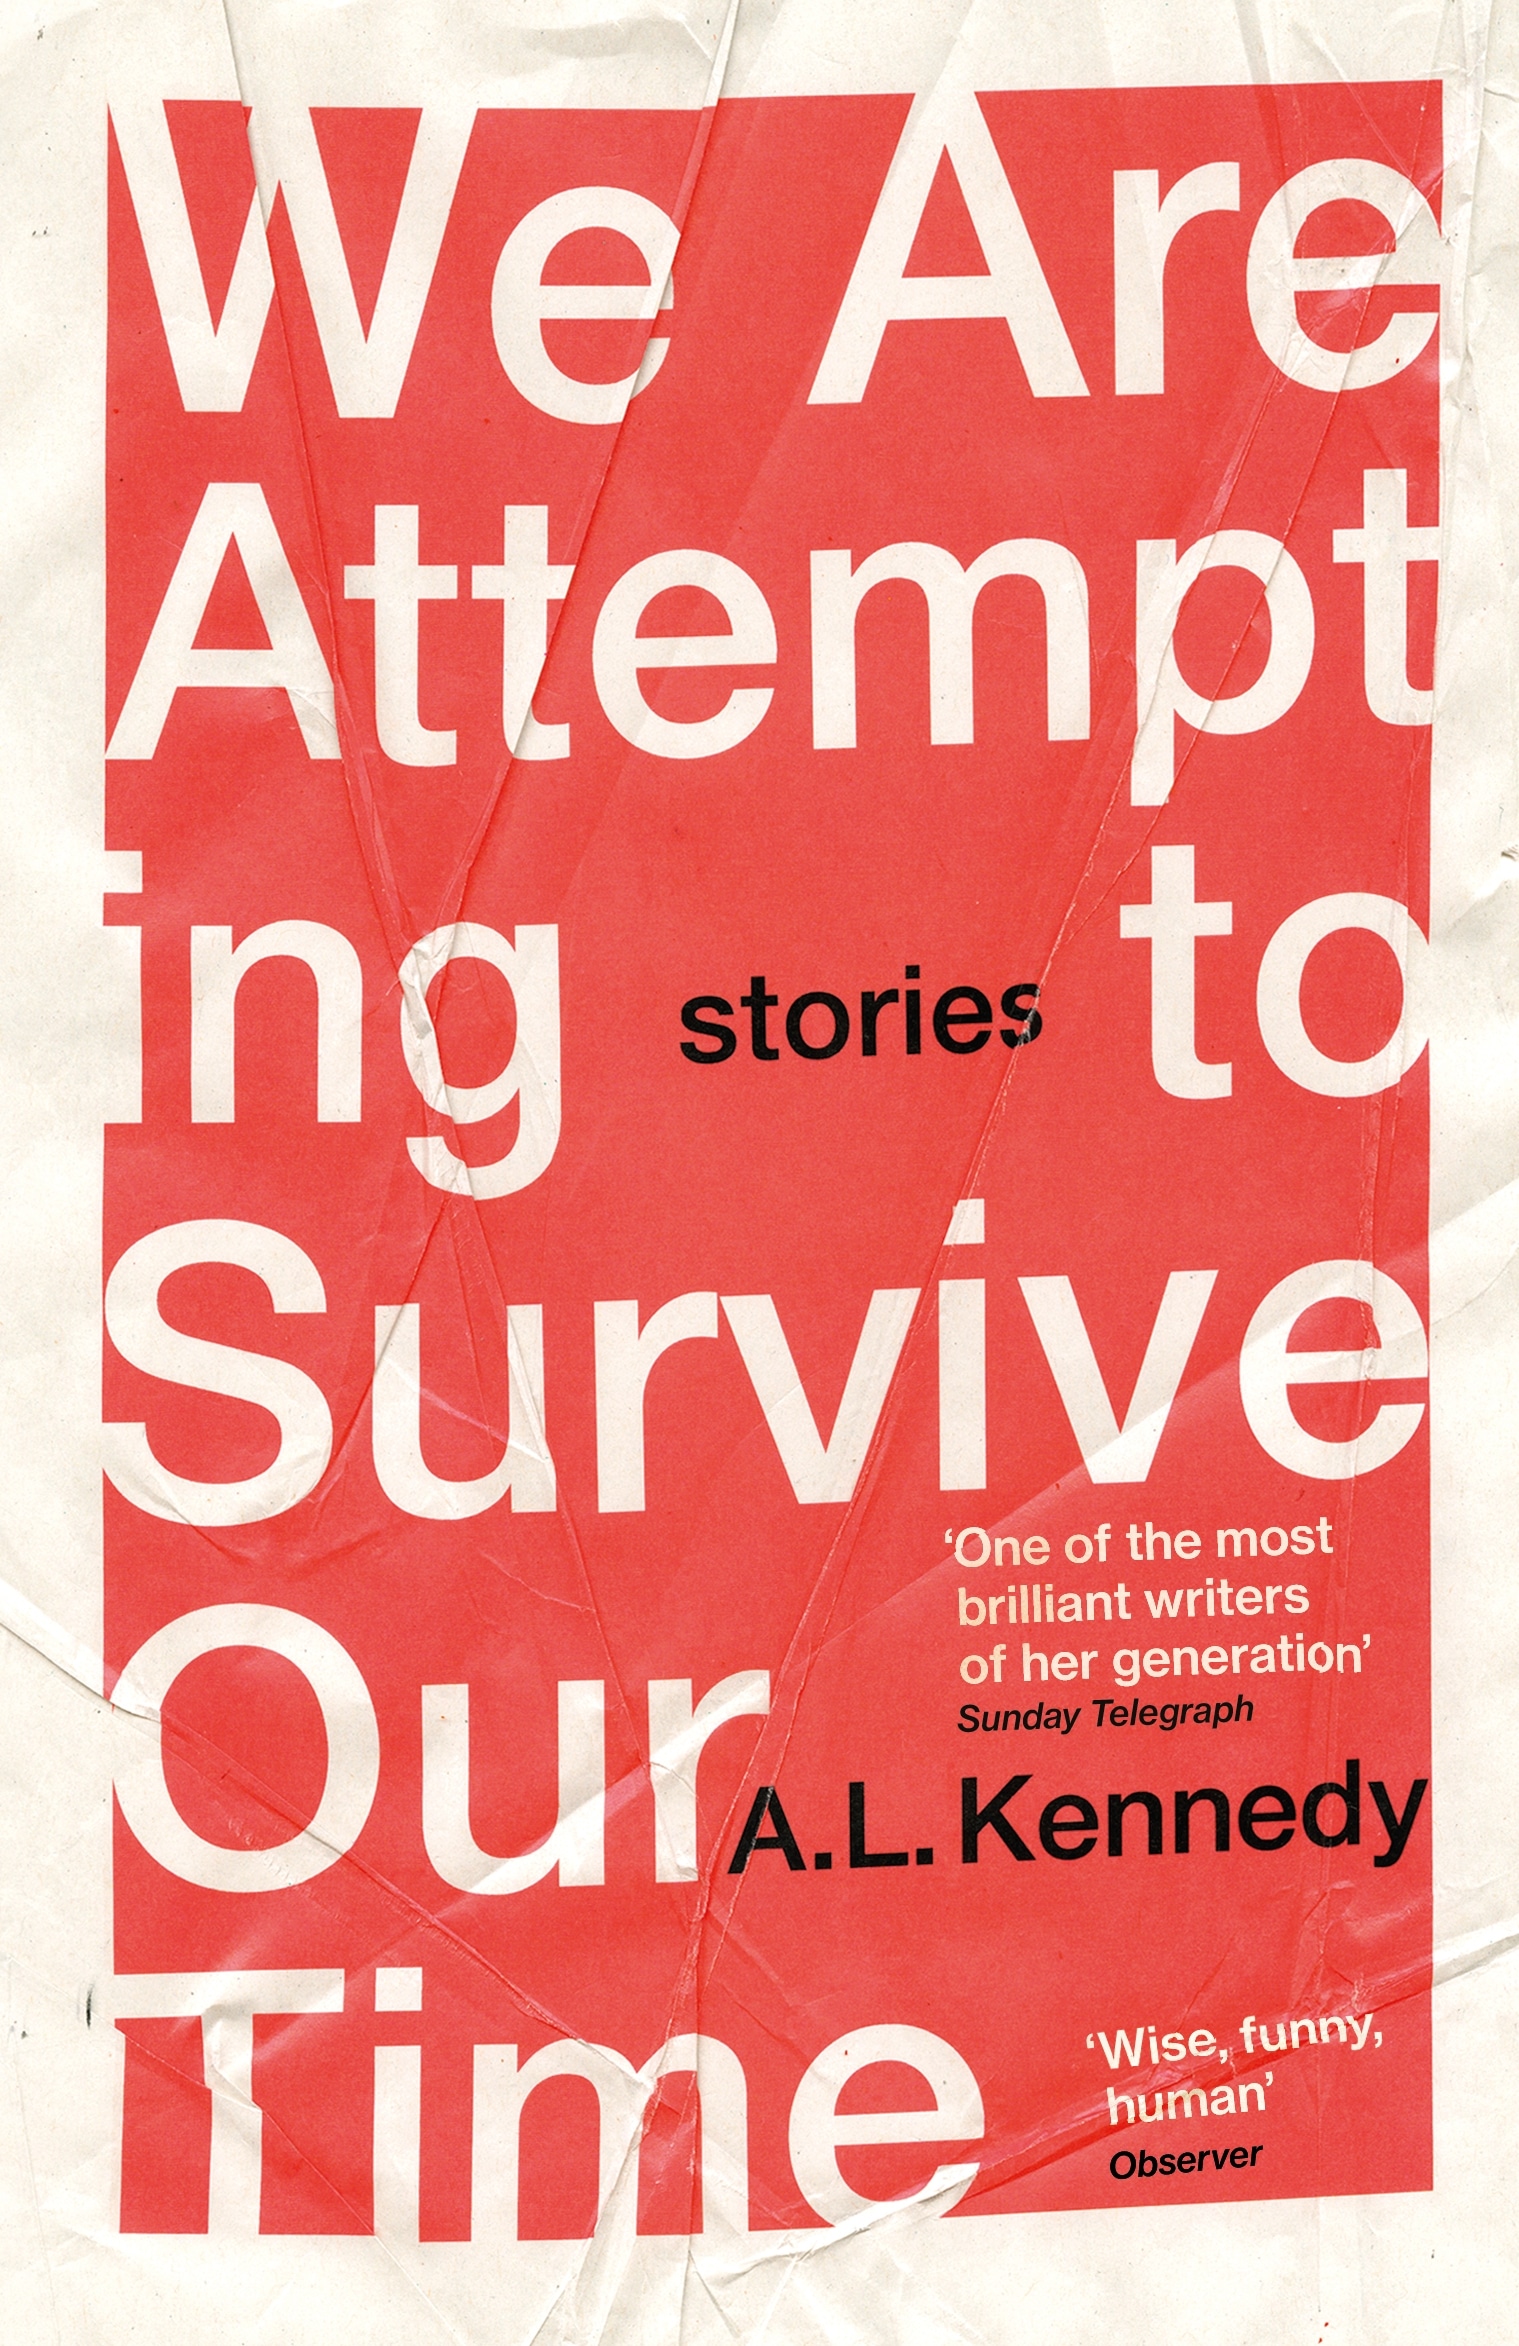 Book “We Are Attempting to Survive Our Time” by A.L. Kennedy — April 1, 2021